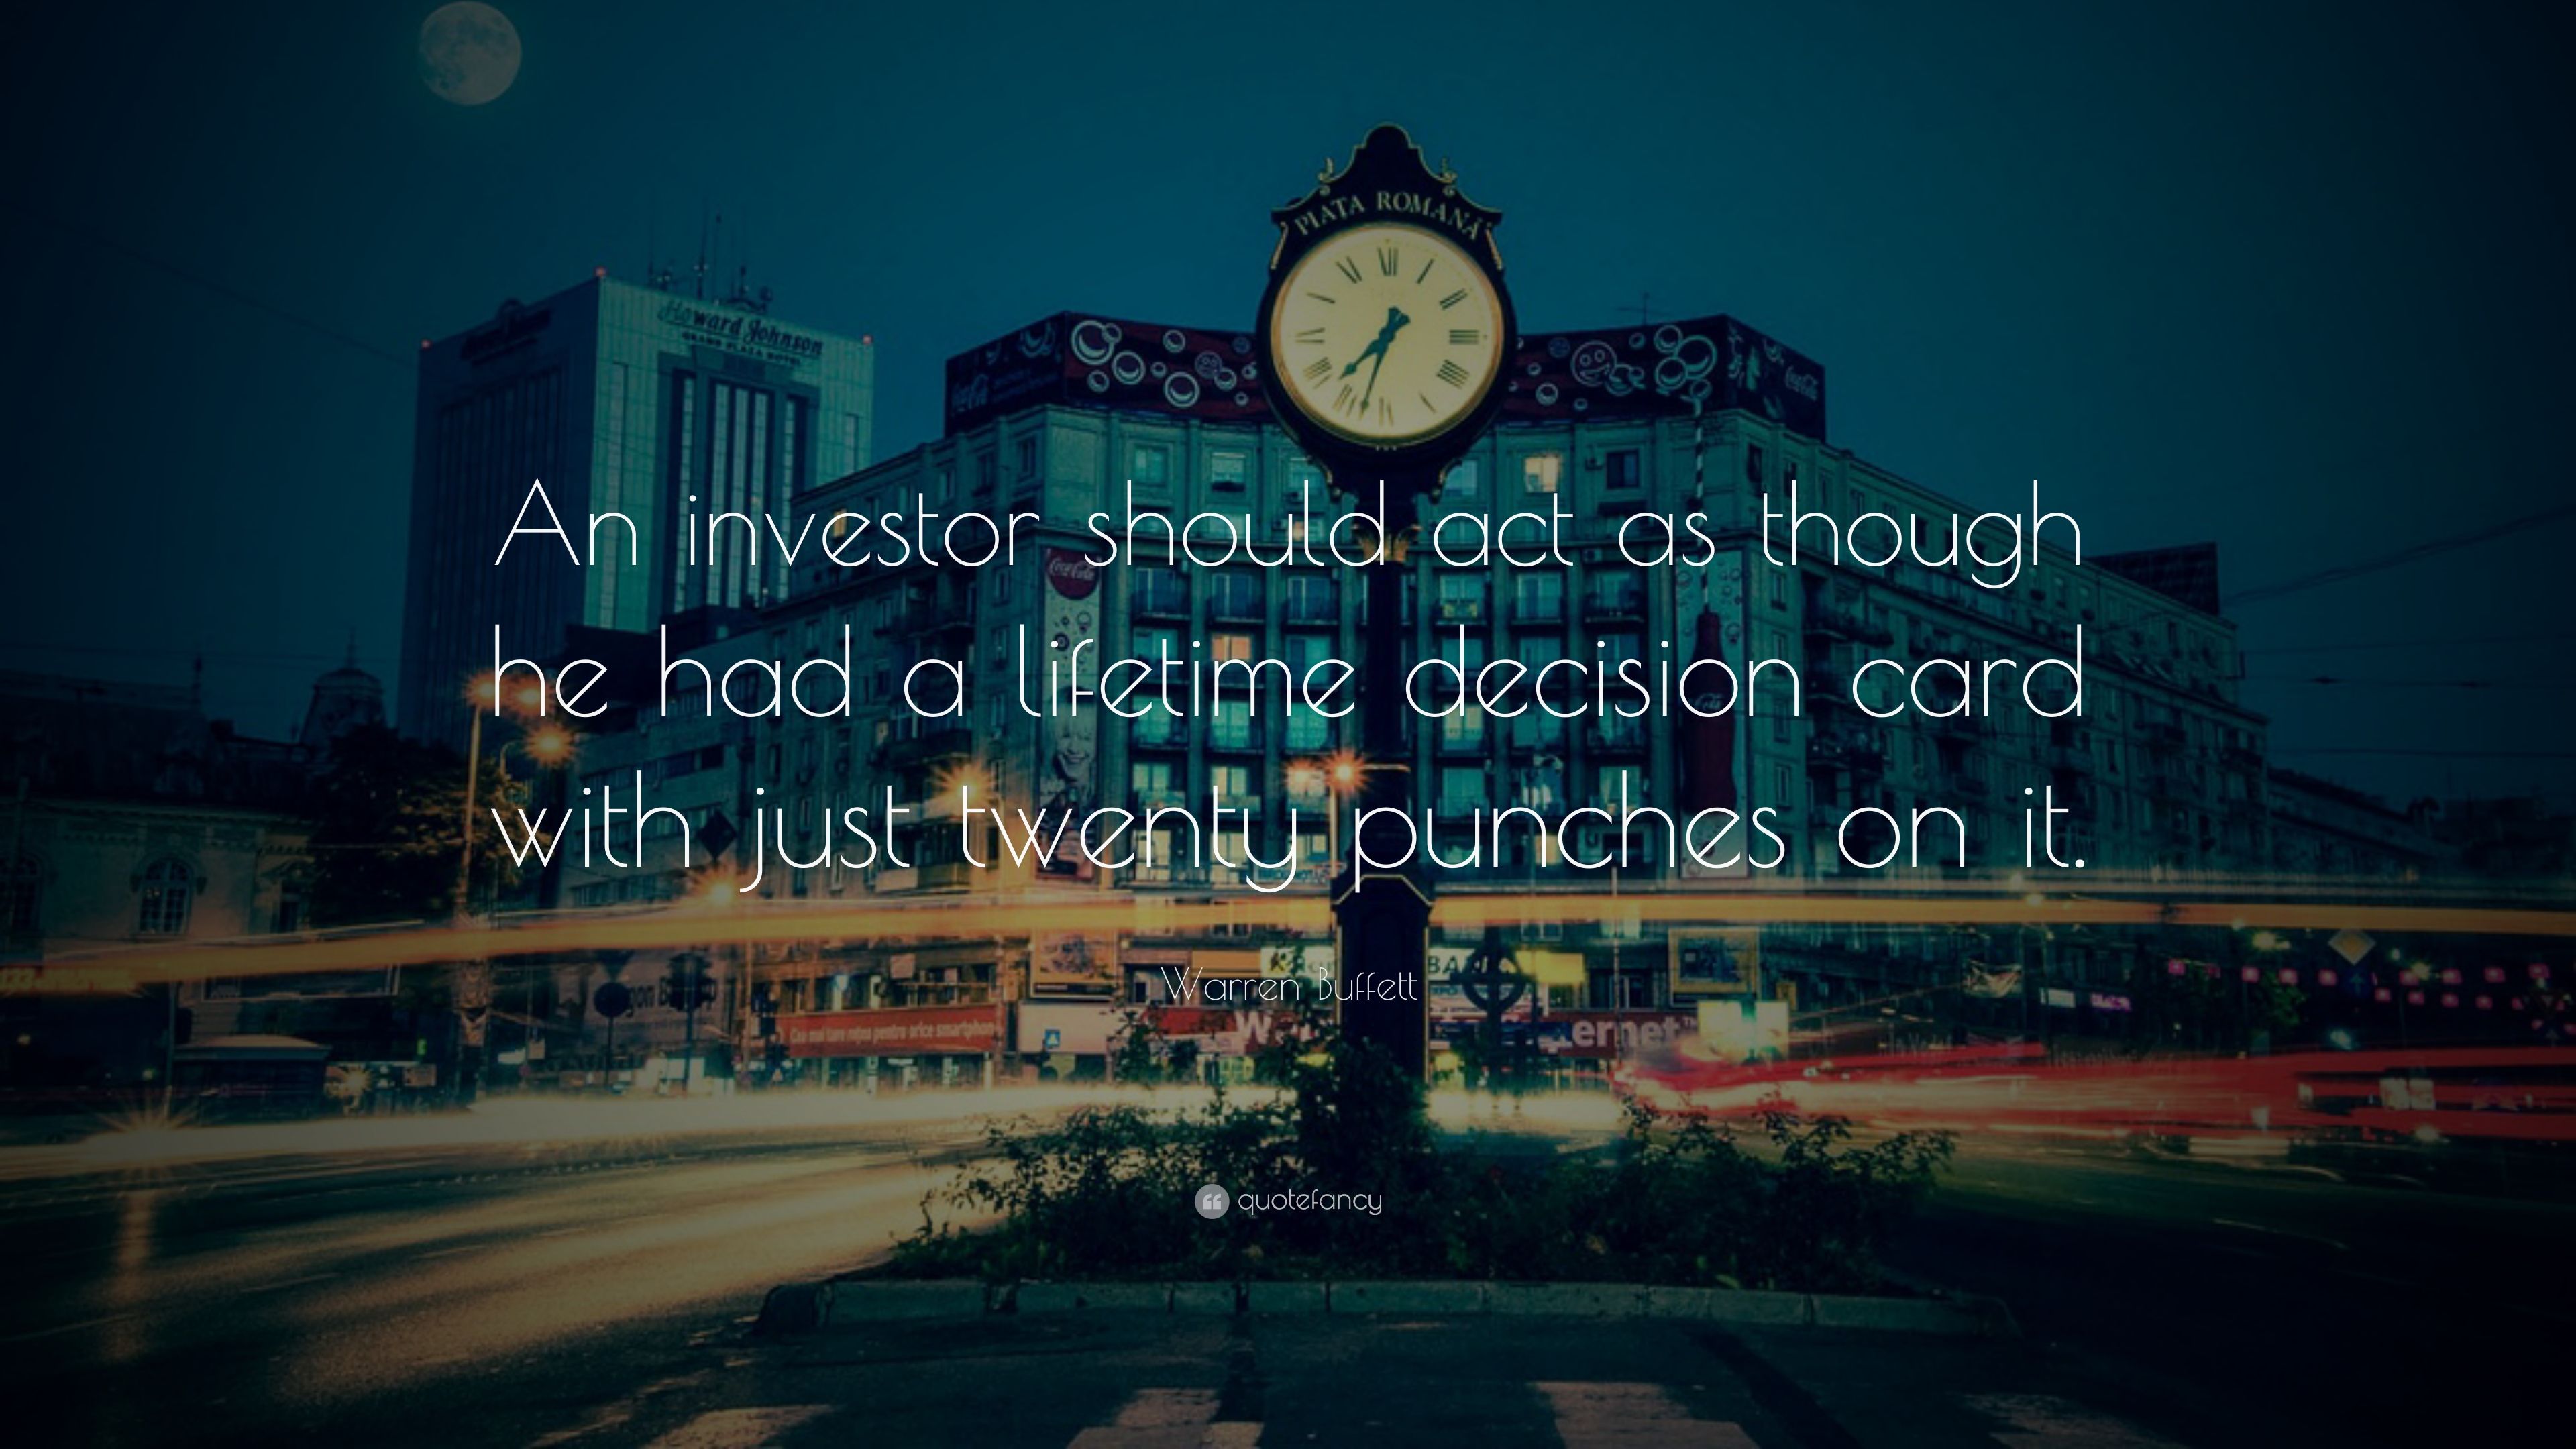 Warren Buffett Quote: “An investor should act as though he had a lifetime decision card with just twenty punches on it.” (14 wallpaper)